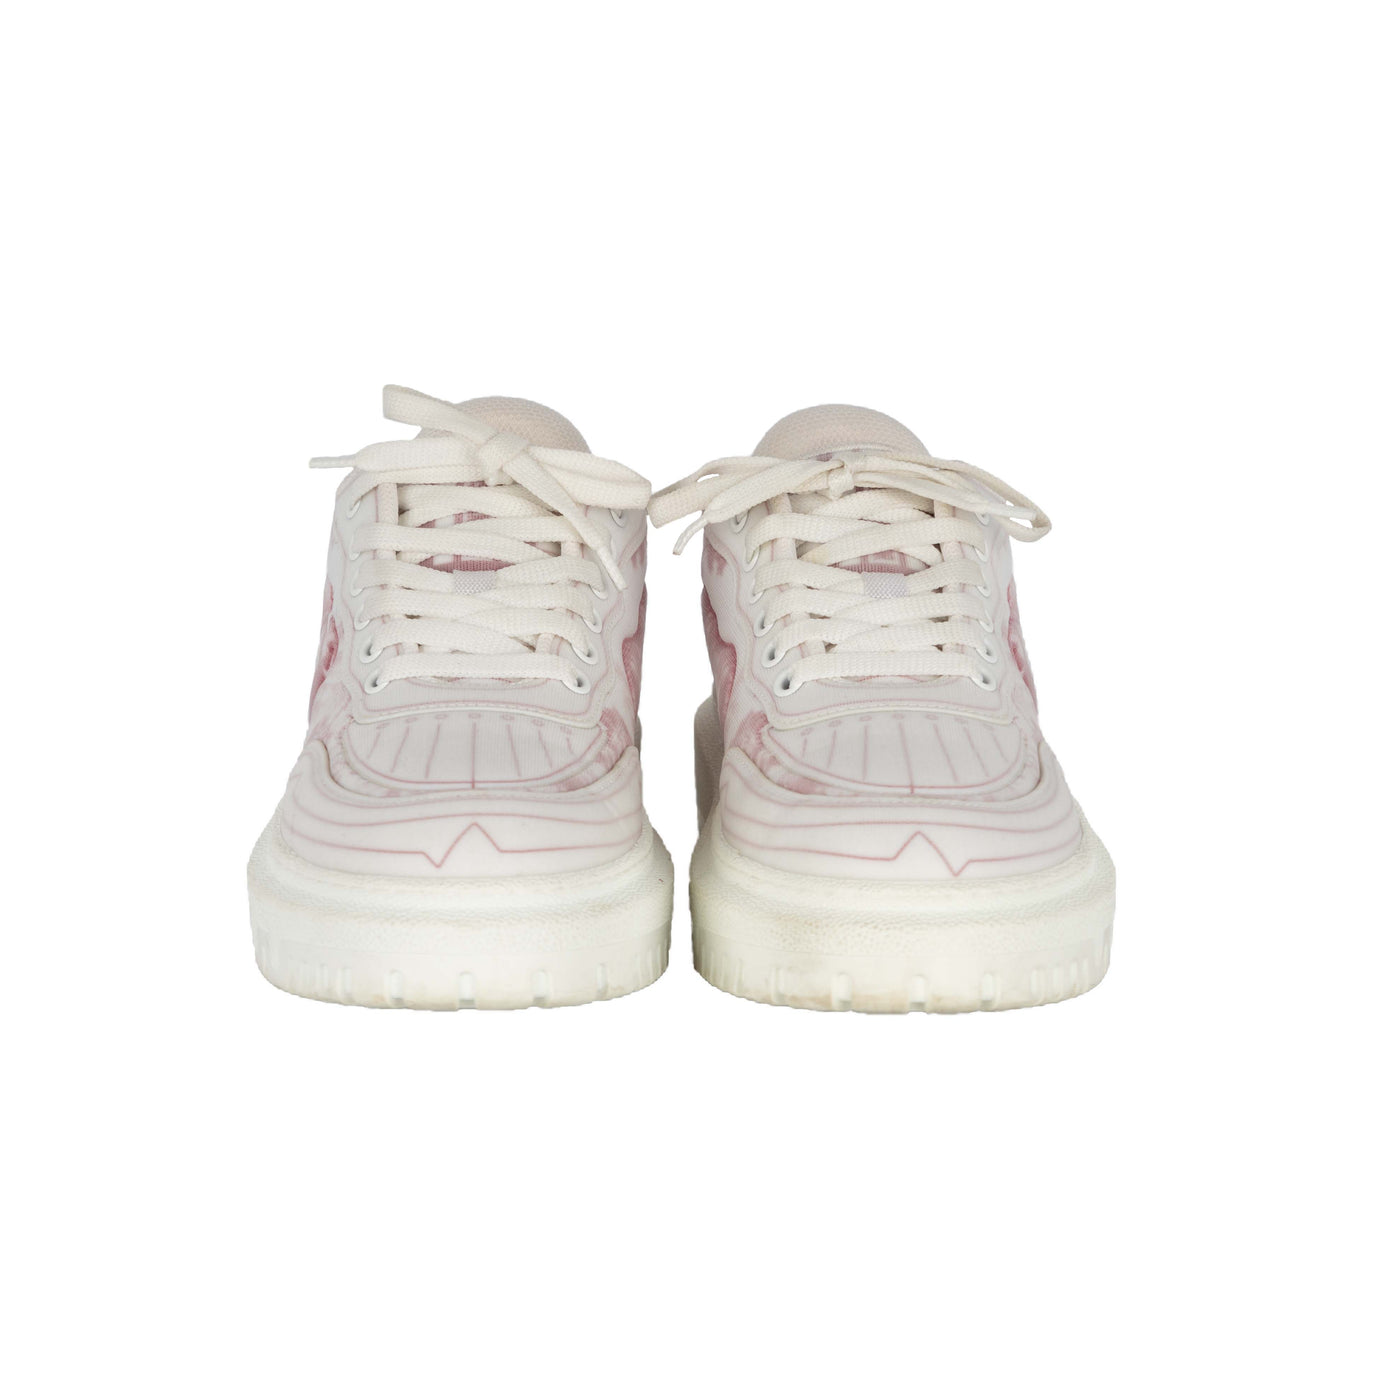 Secondhand Christian Dior Addict Pink Toile De Jouy Sneakers